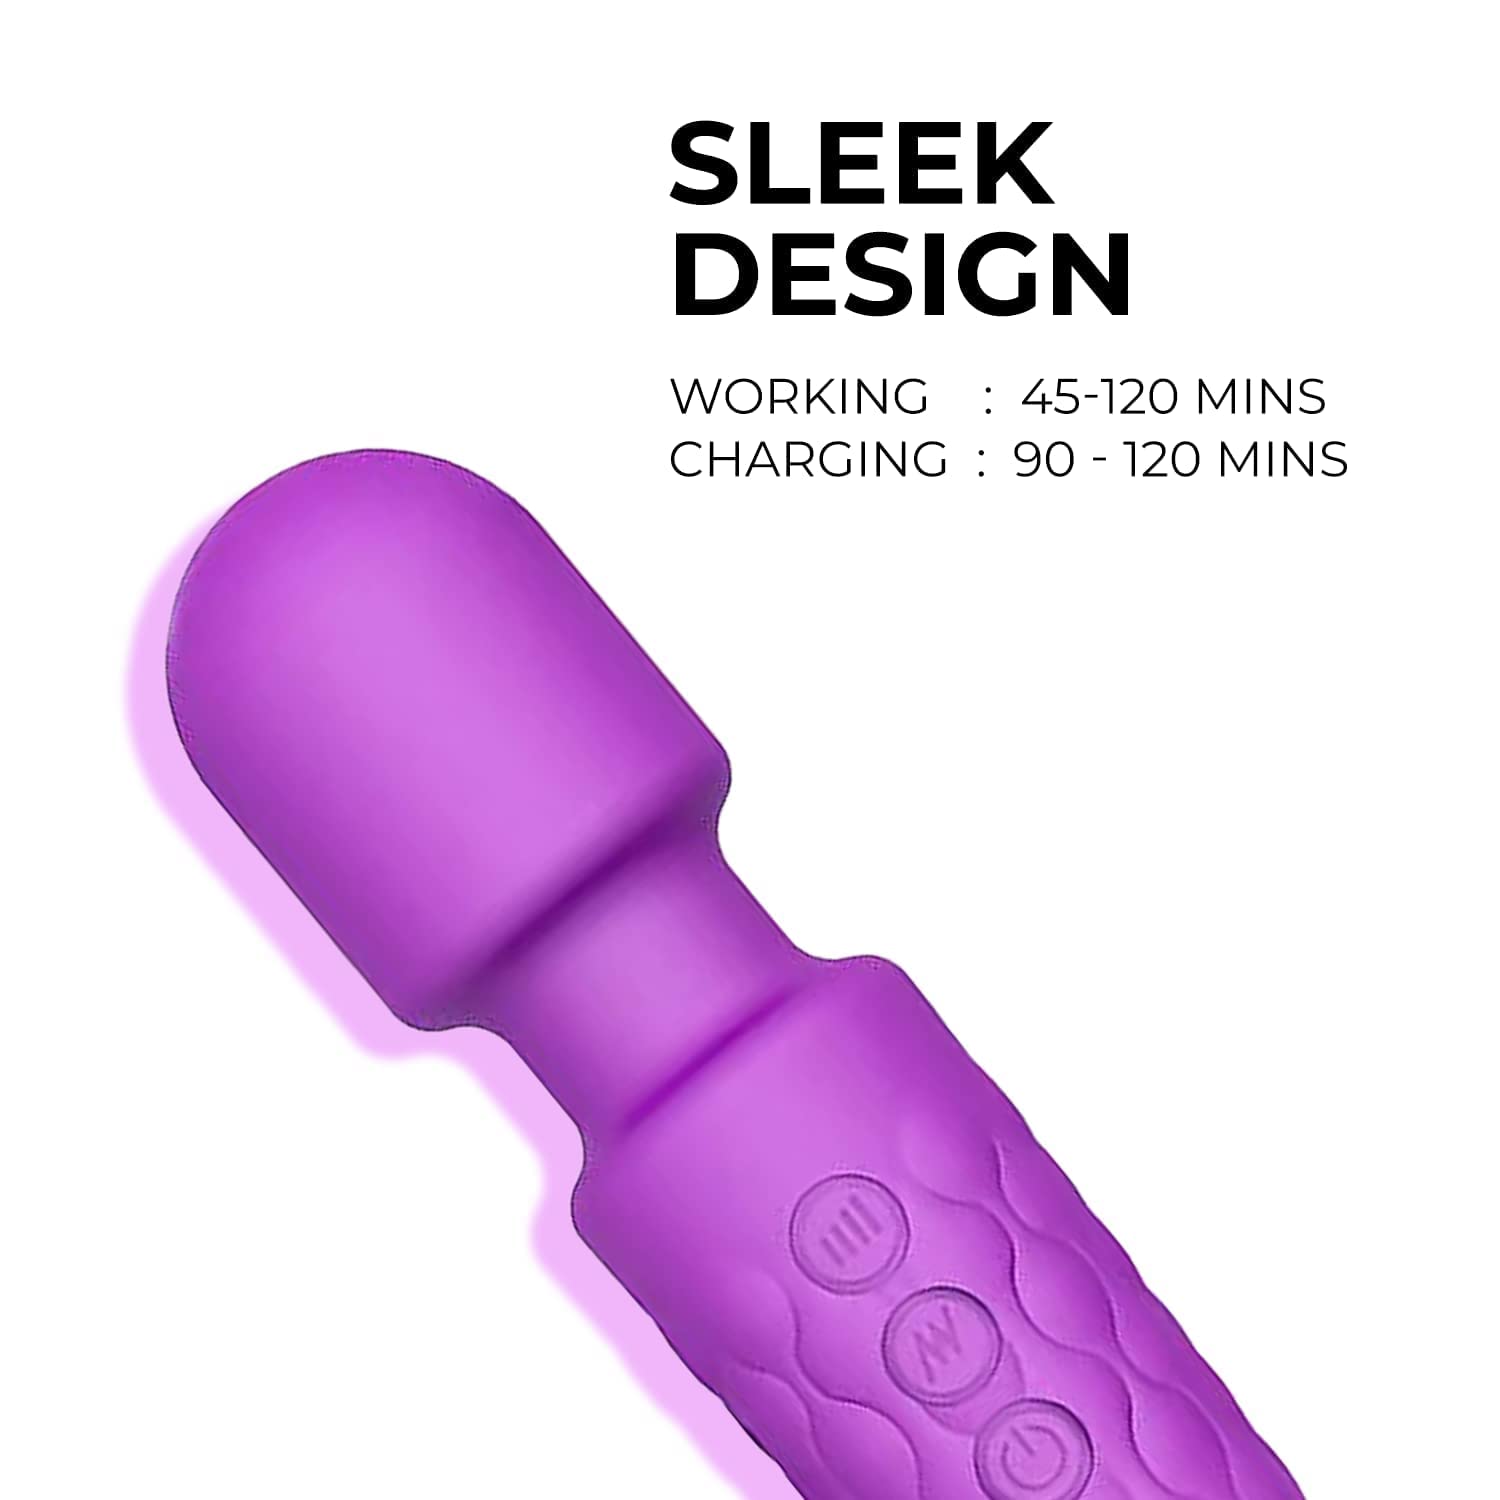 Indulge in Blissful Relaxation with Our Waterproof Rechargeable Personal Body Massager - 20 Vibration Modes, 8 Speed Patterns for Ultimate Pain Relief